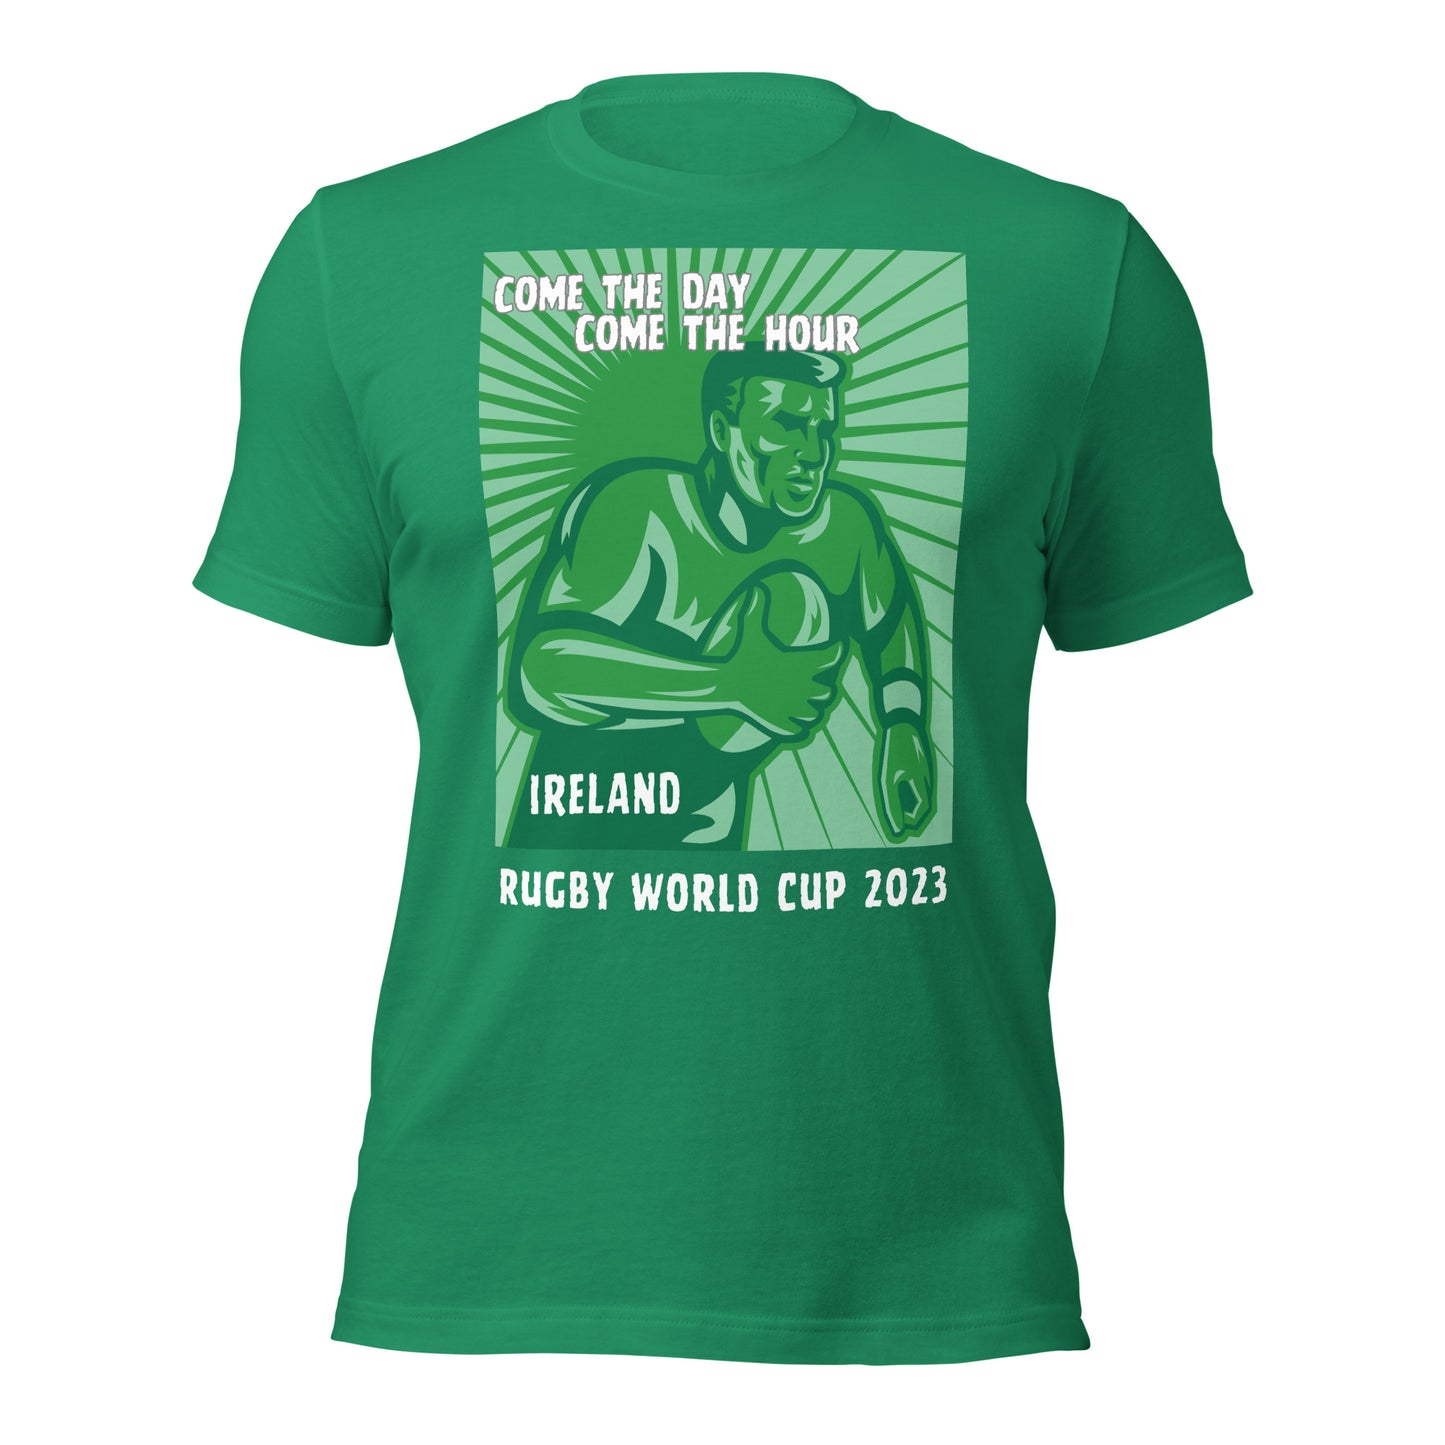 Irish Rugby Fan's Unisex t-shirt "Come The Day, Come The Hour"